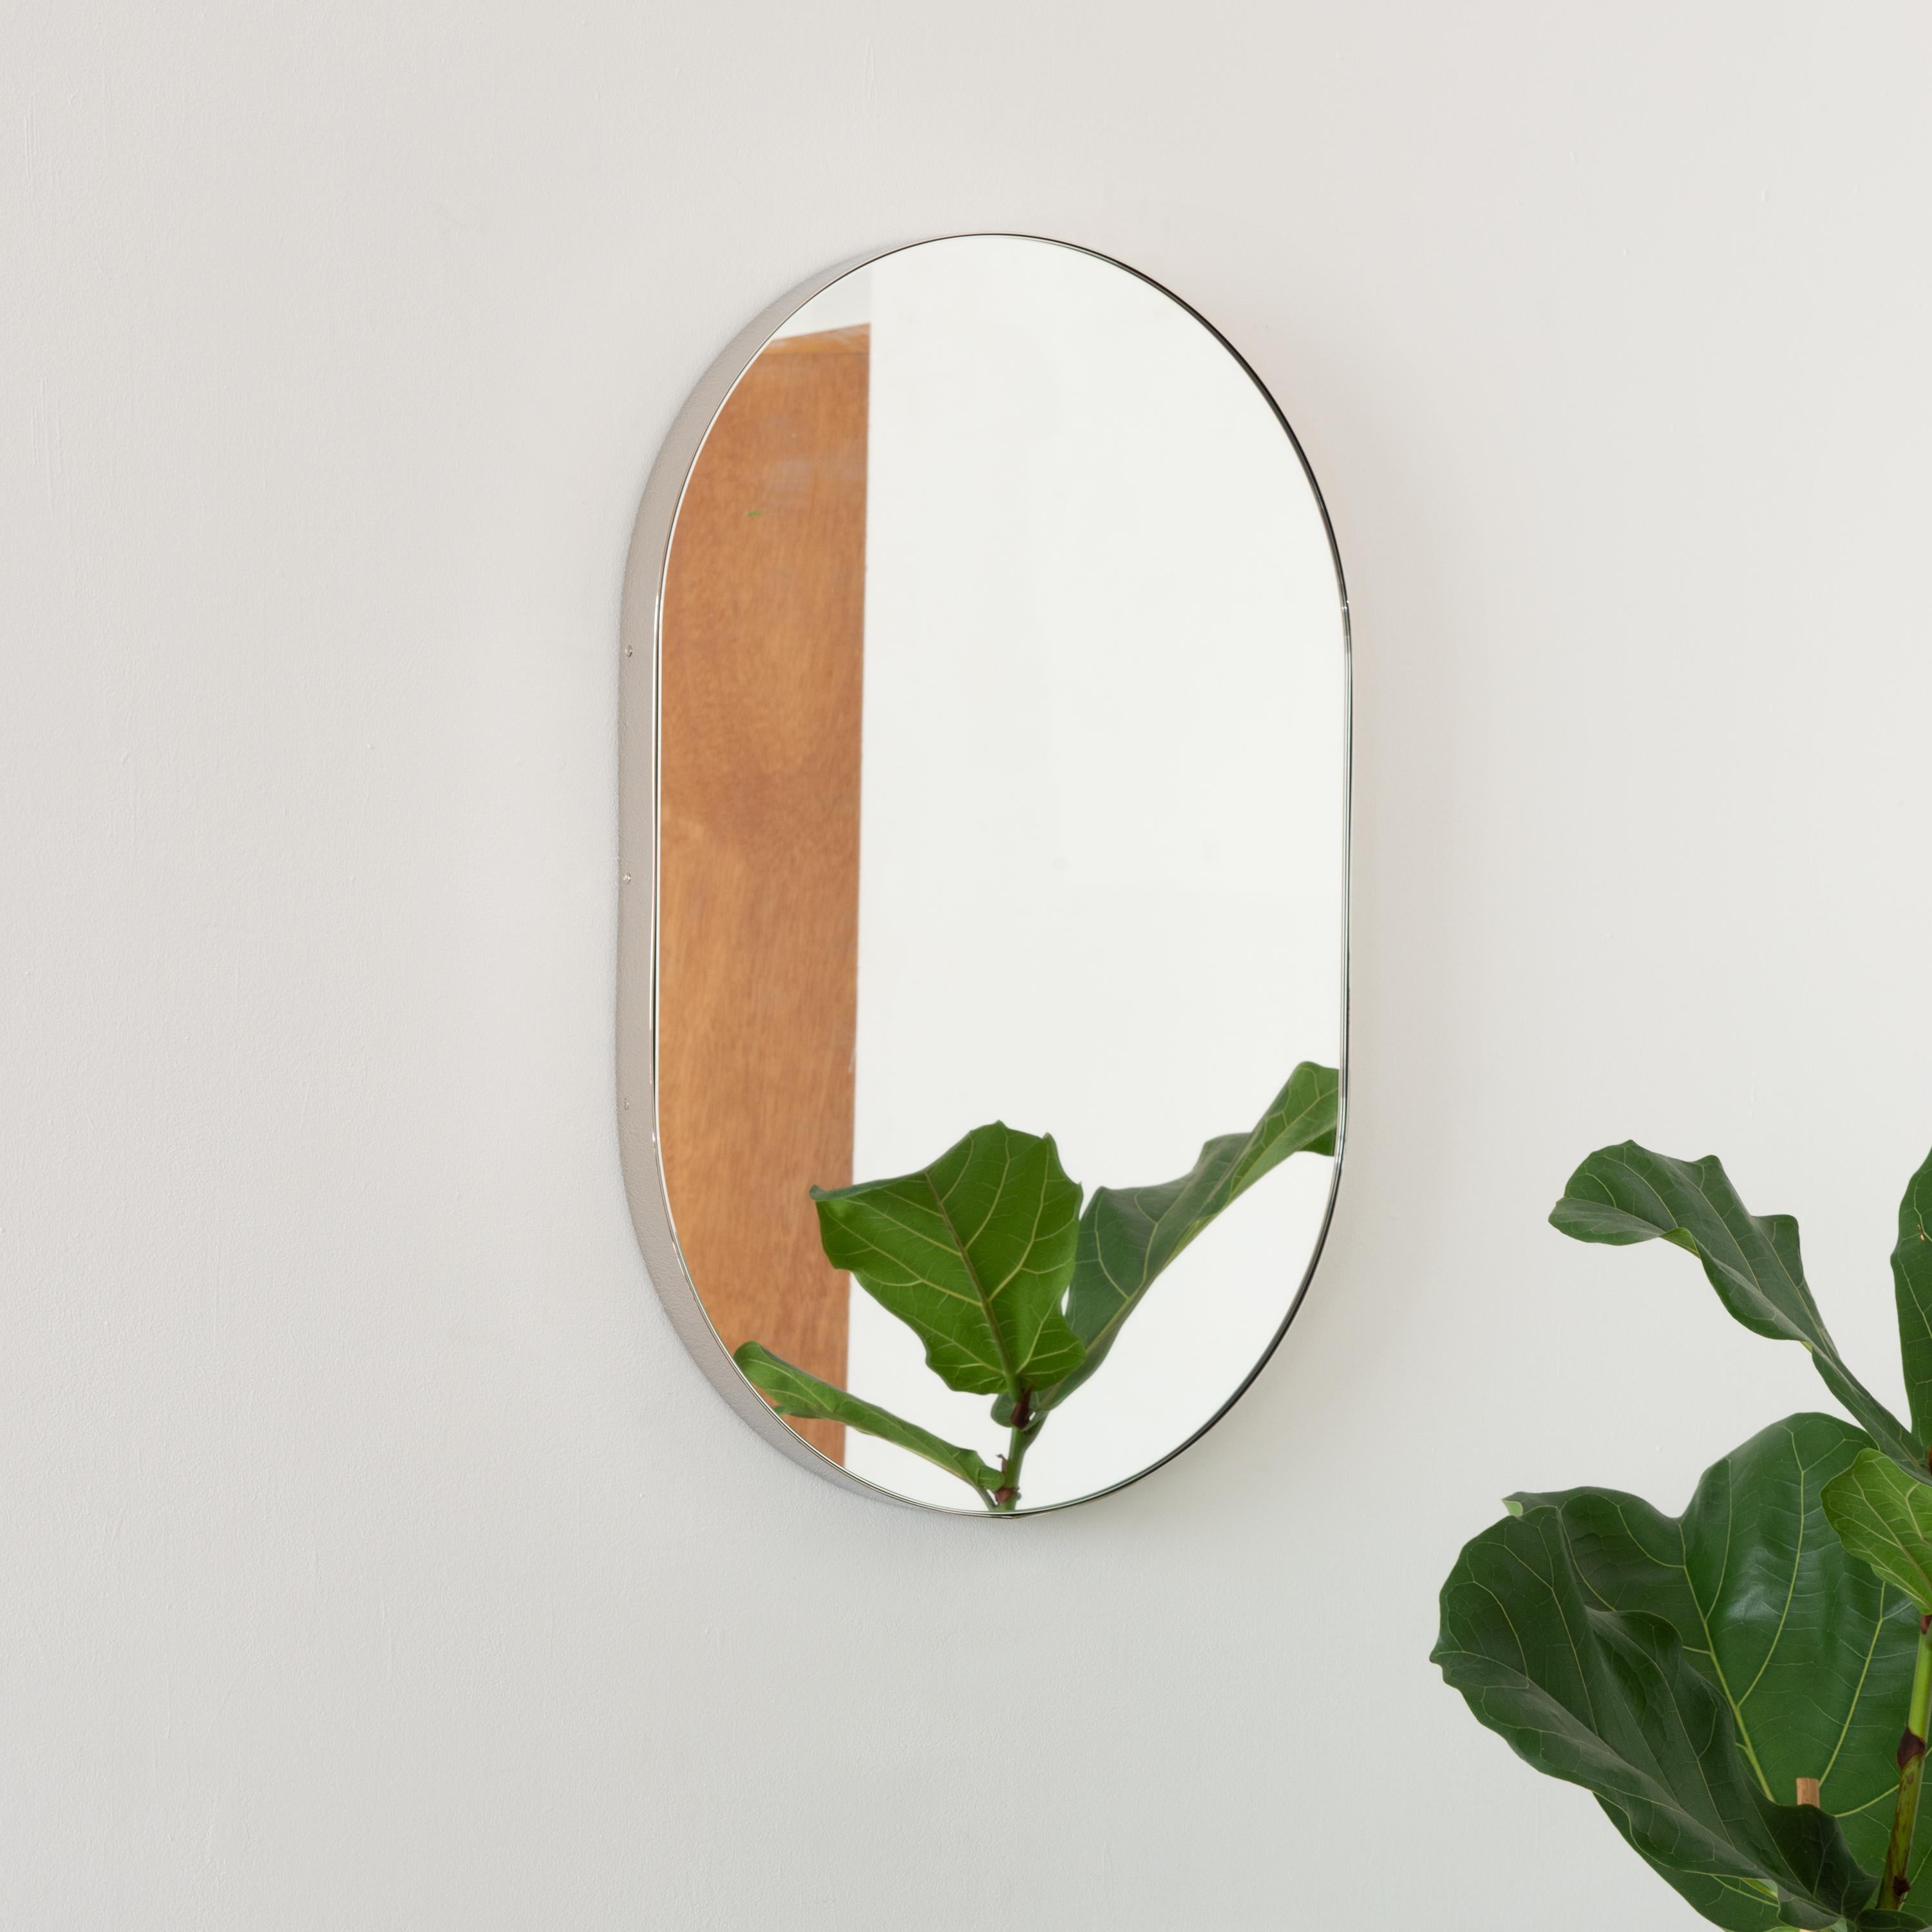 This item is available now from stock. It may be packed and shipped within 3 days of receiving an order.

Delightful capsule shaped mirror with an elegant nickel plated frame. Designed and handcrafted in London, UK.

Fitted with a brass hook or an